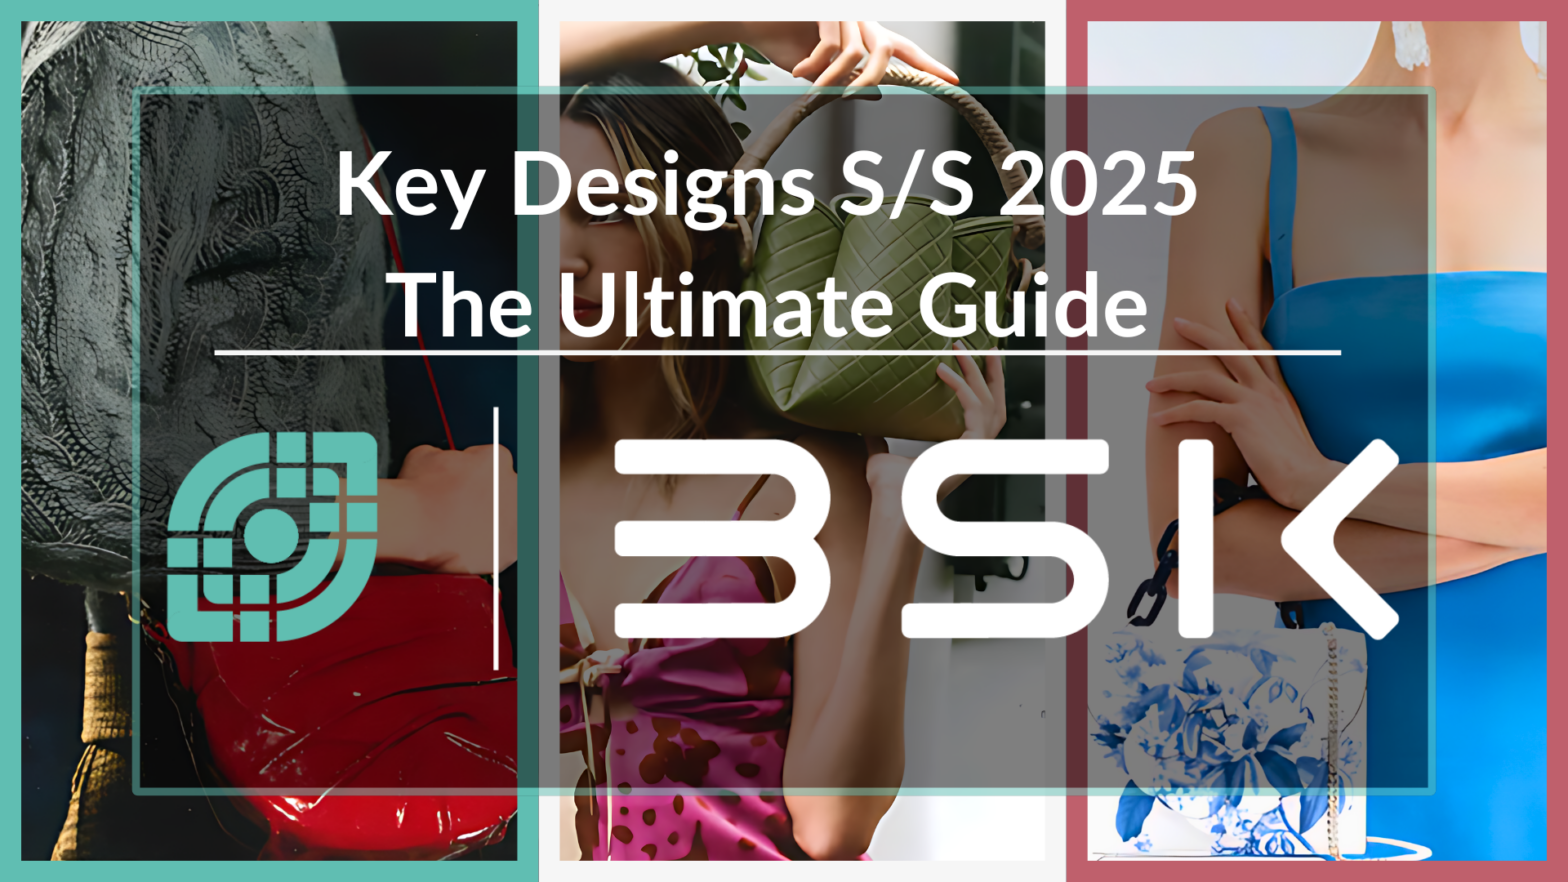 Key Designs S/S 2025 The Ultimate Guide